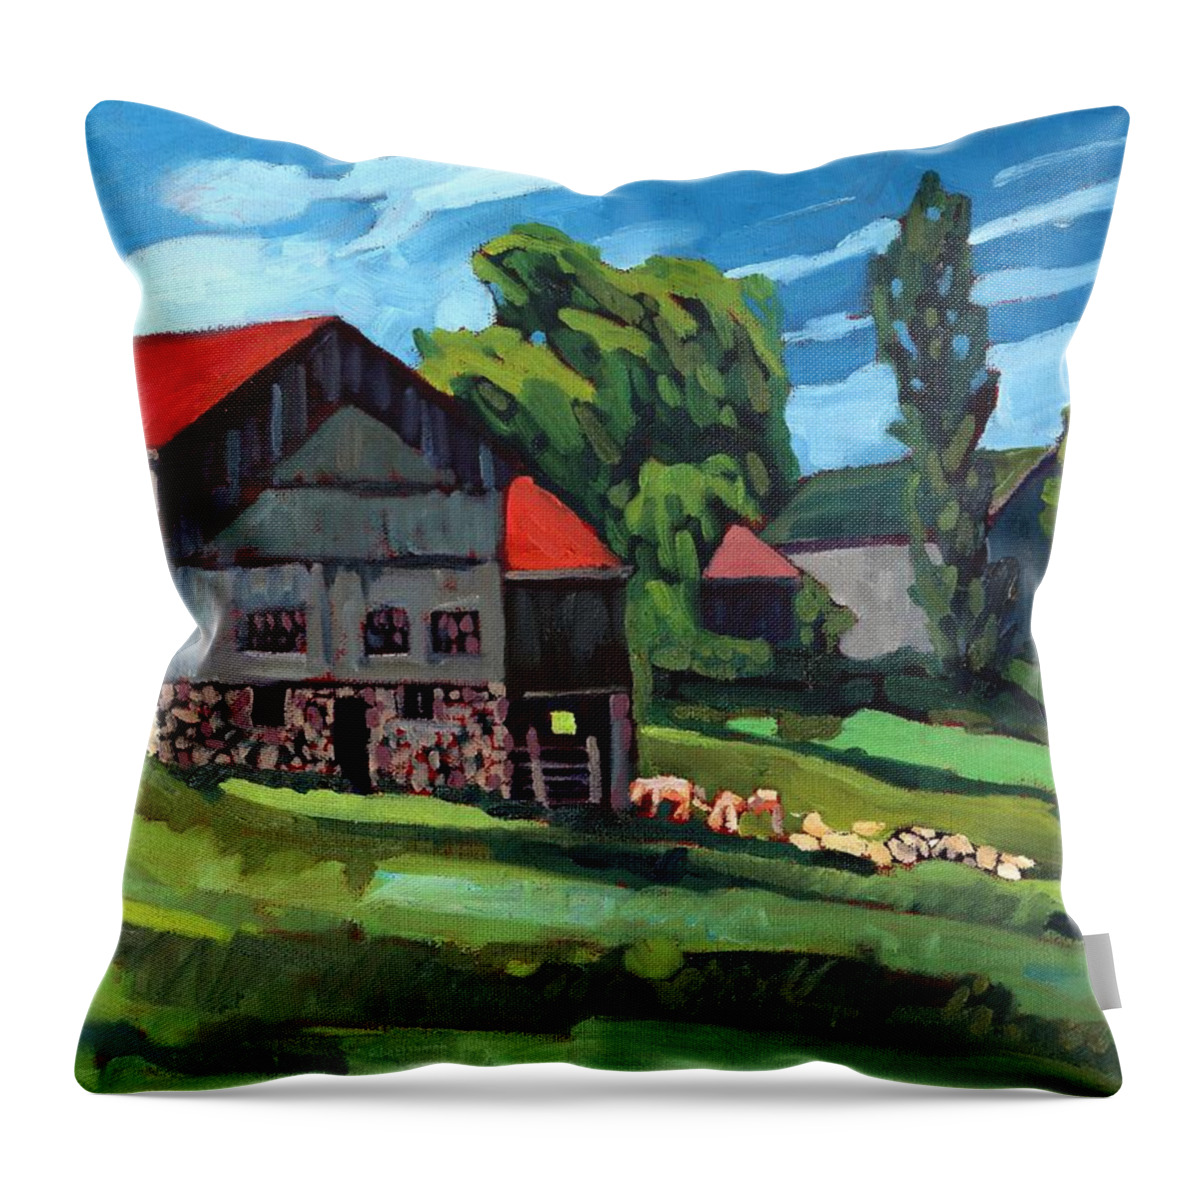 814 Throw Pillow featuring the painting Barn Roofs by Phil Chadwick